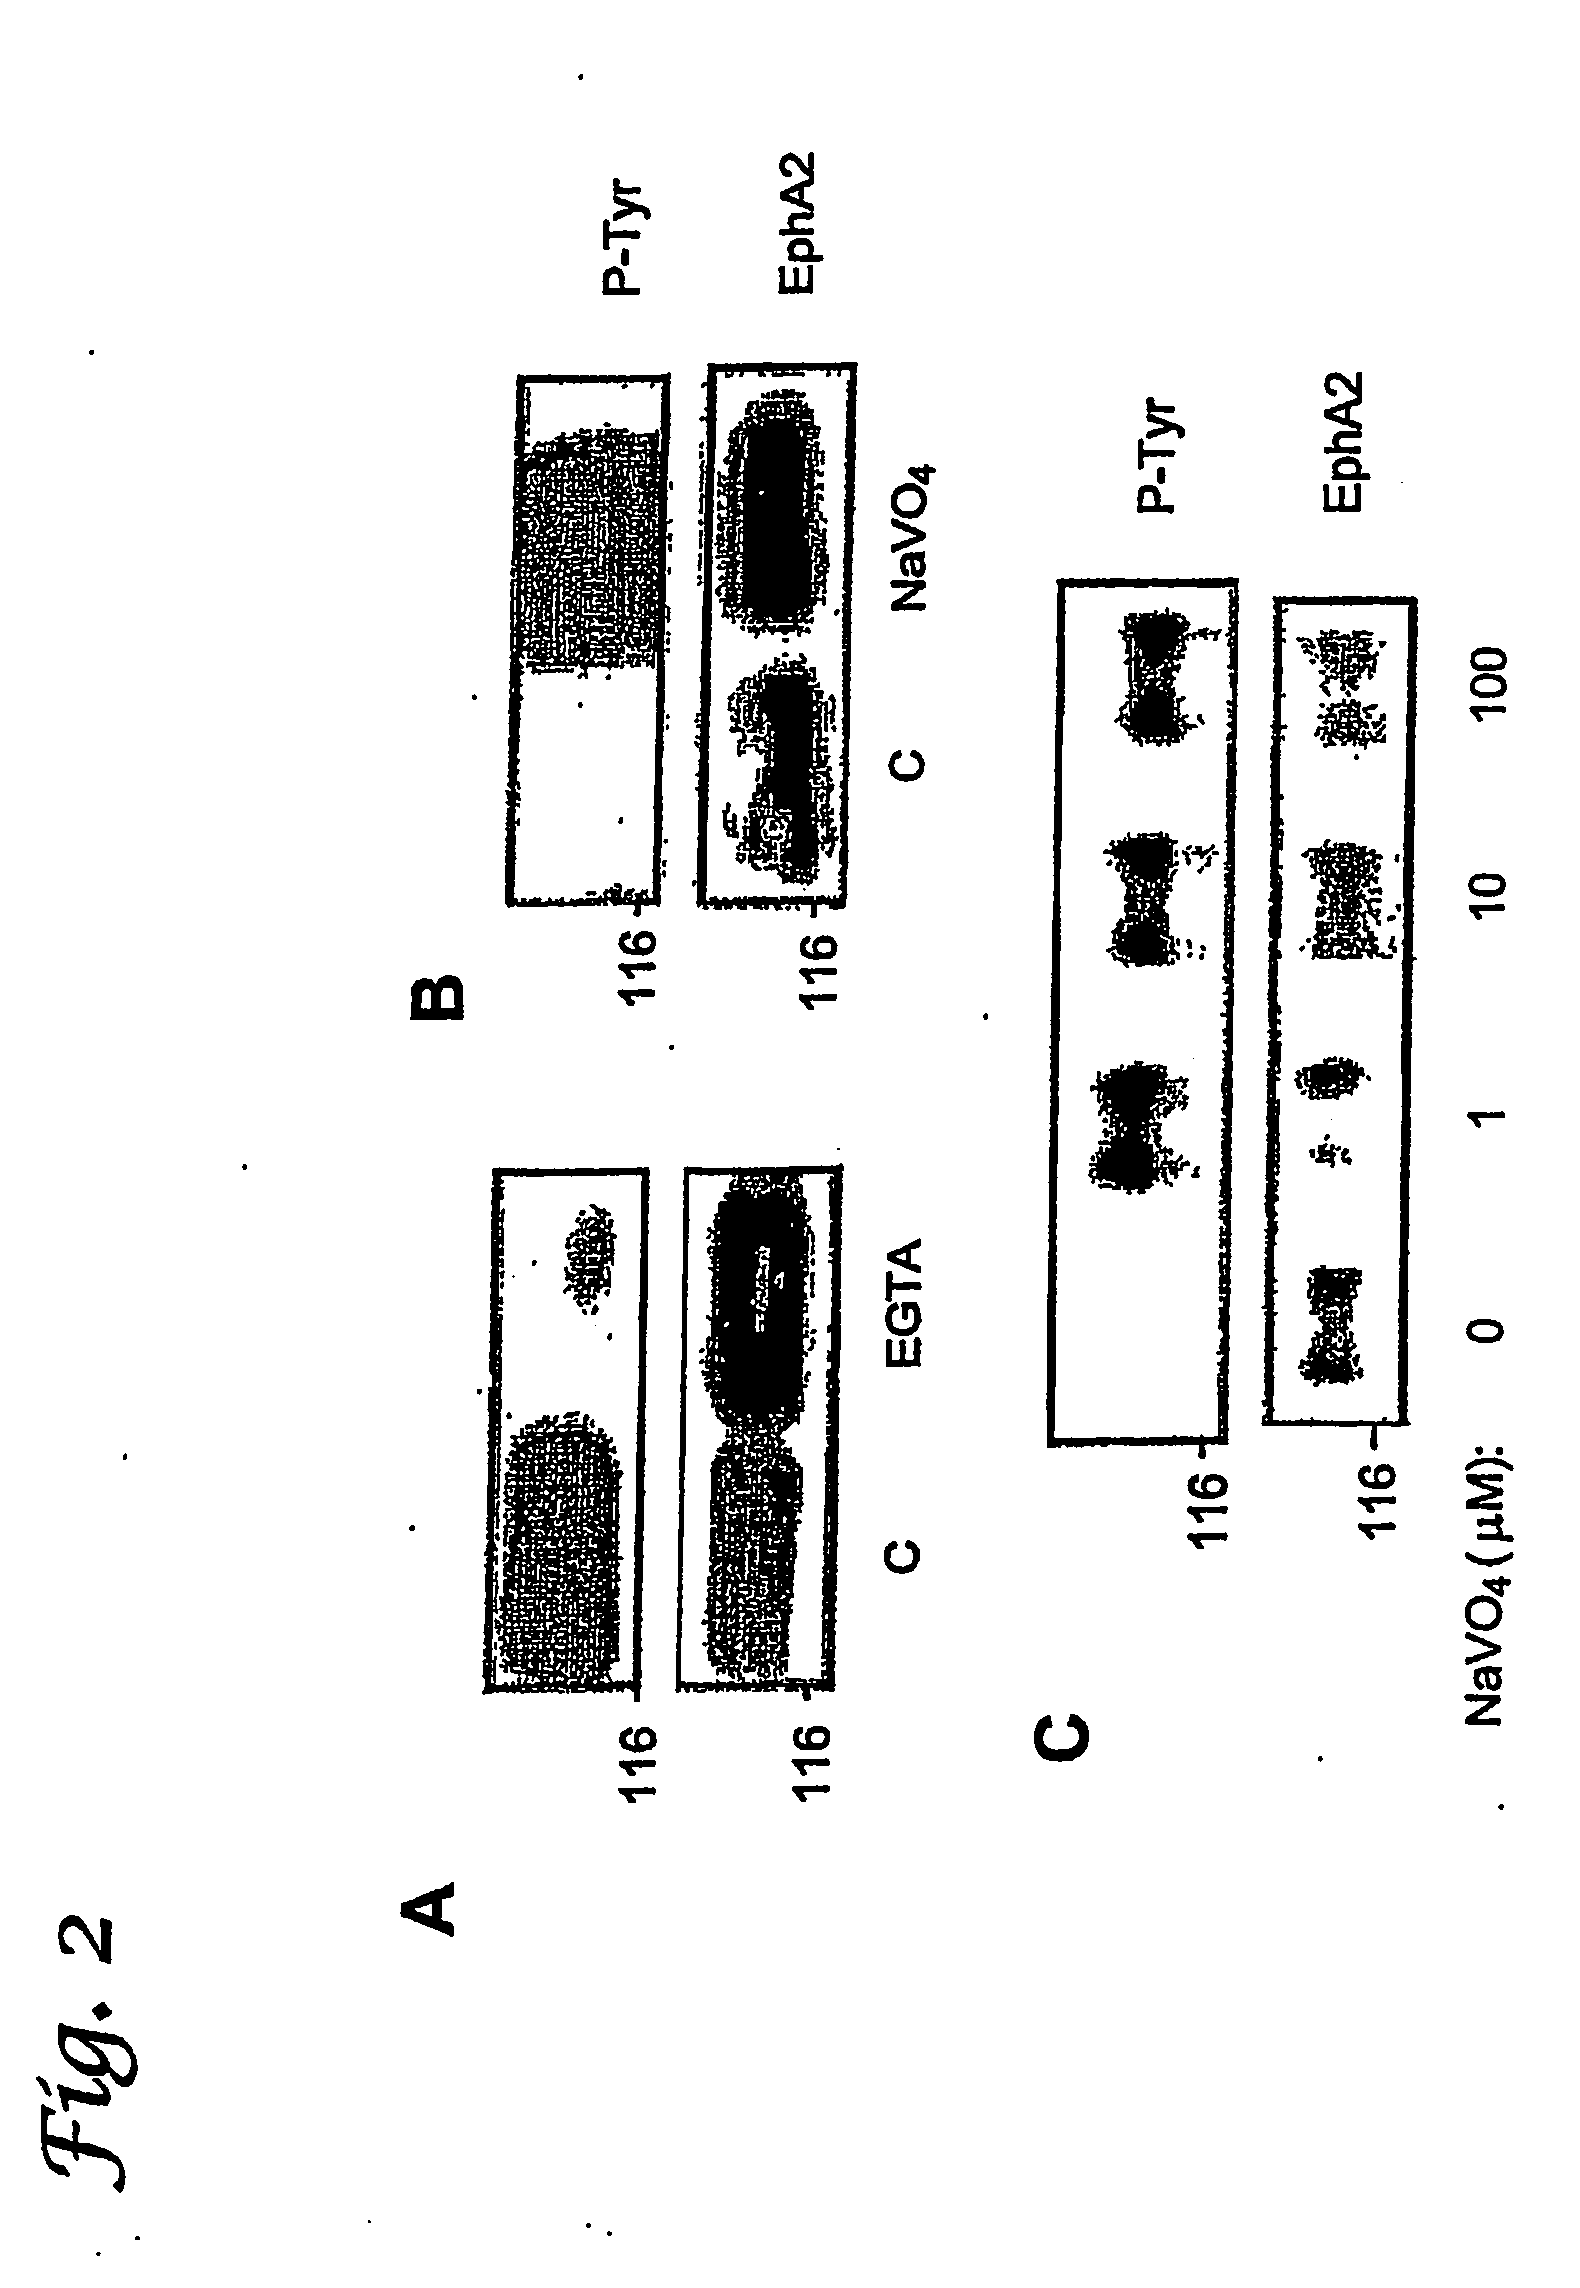 EphA2, EphA4 and LMW-PTP and methods of treatment of hyperproliferative cell disorders